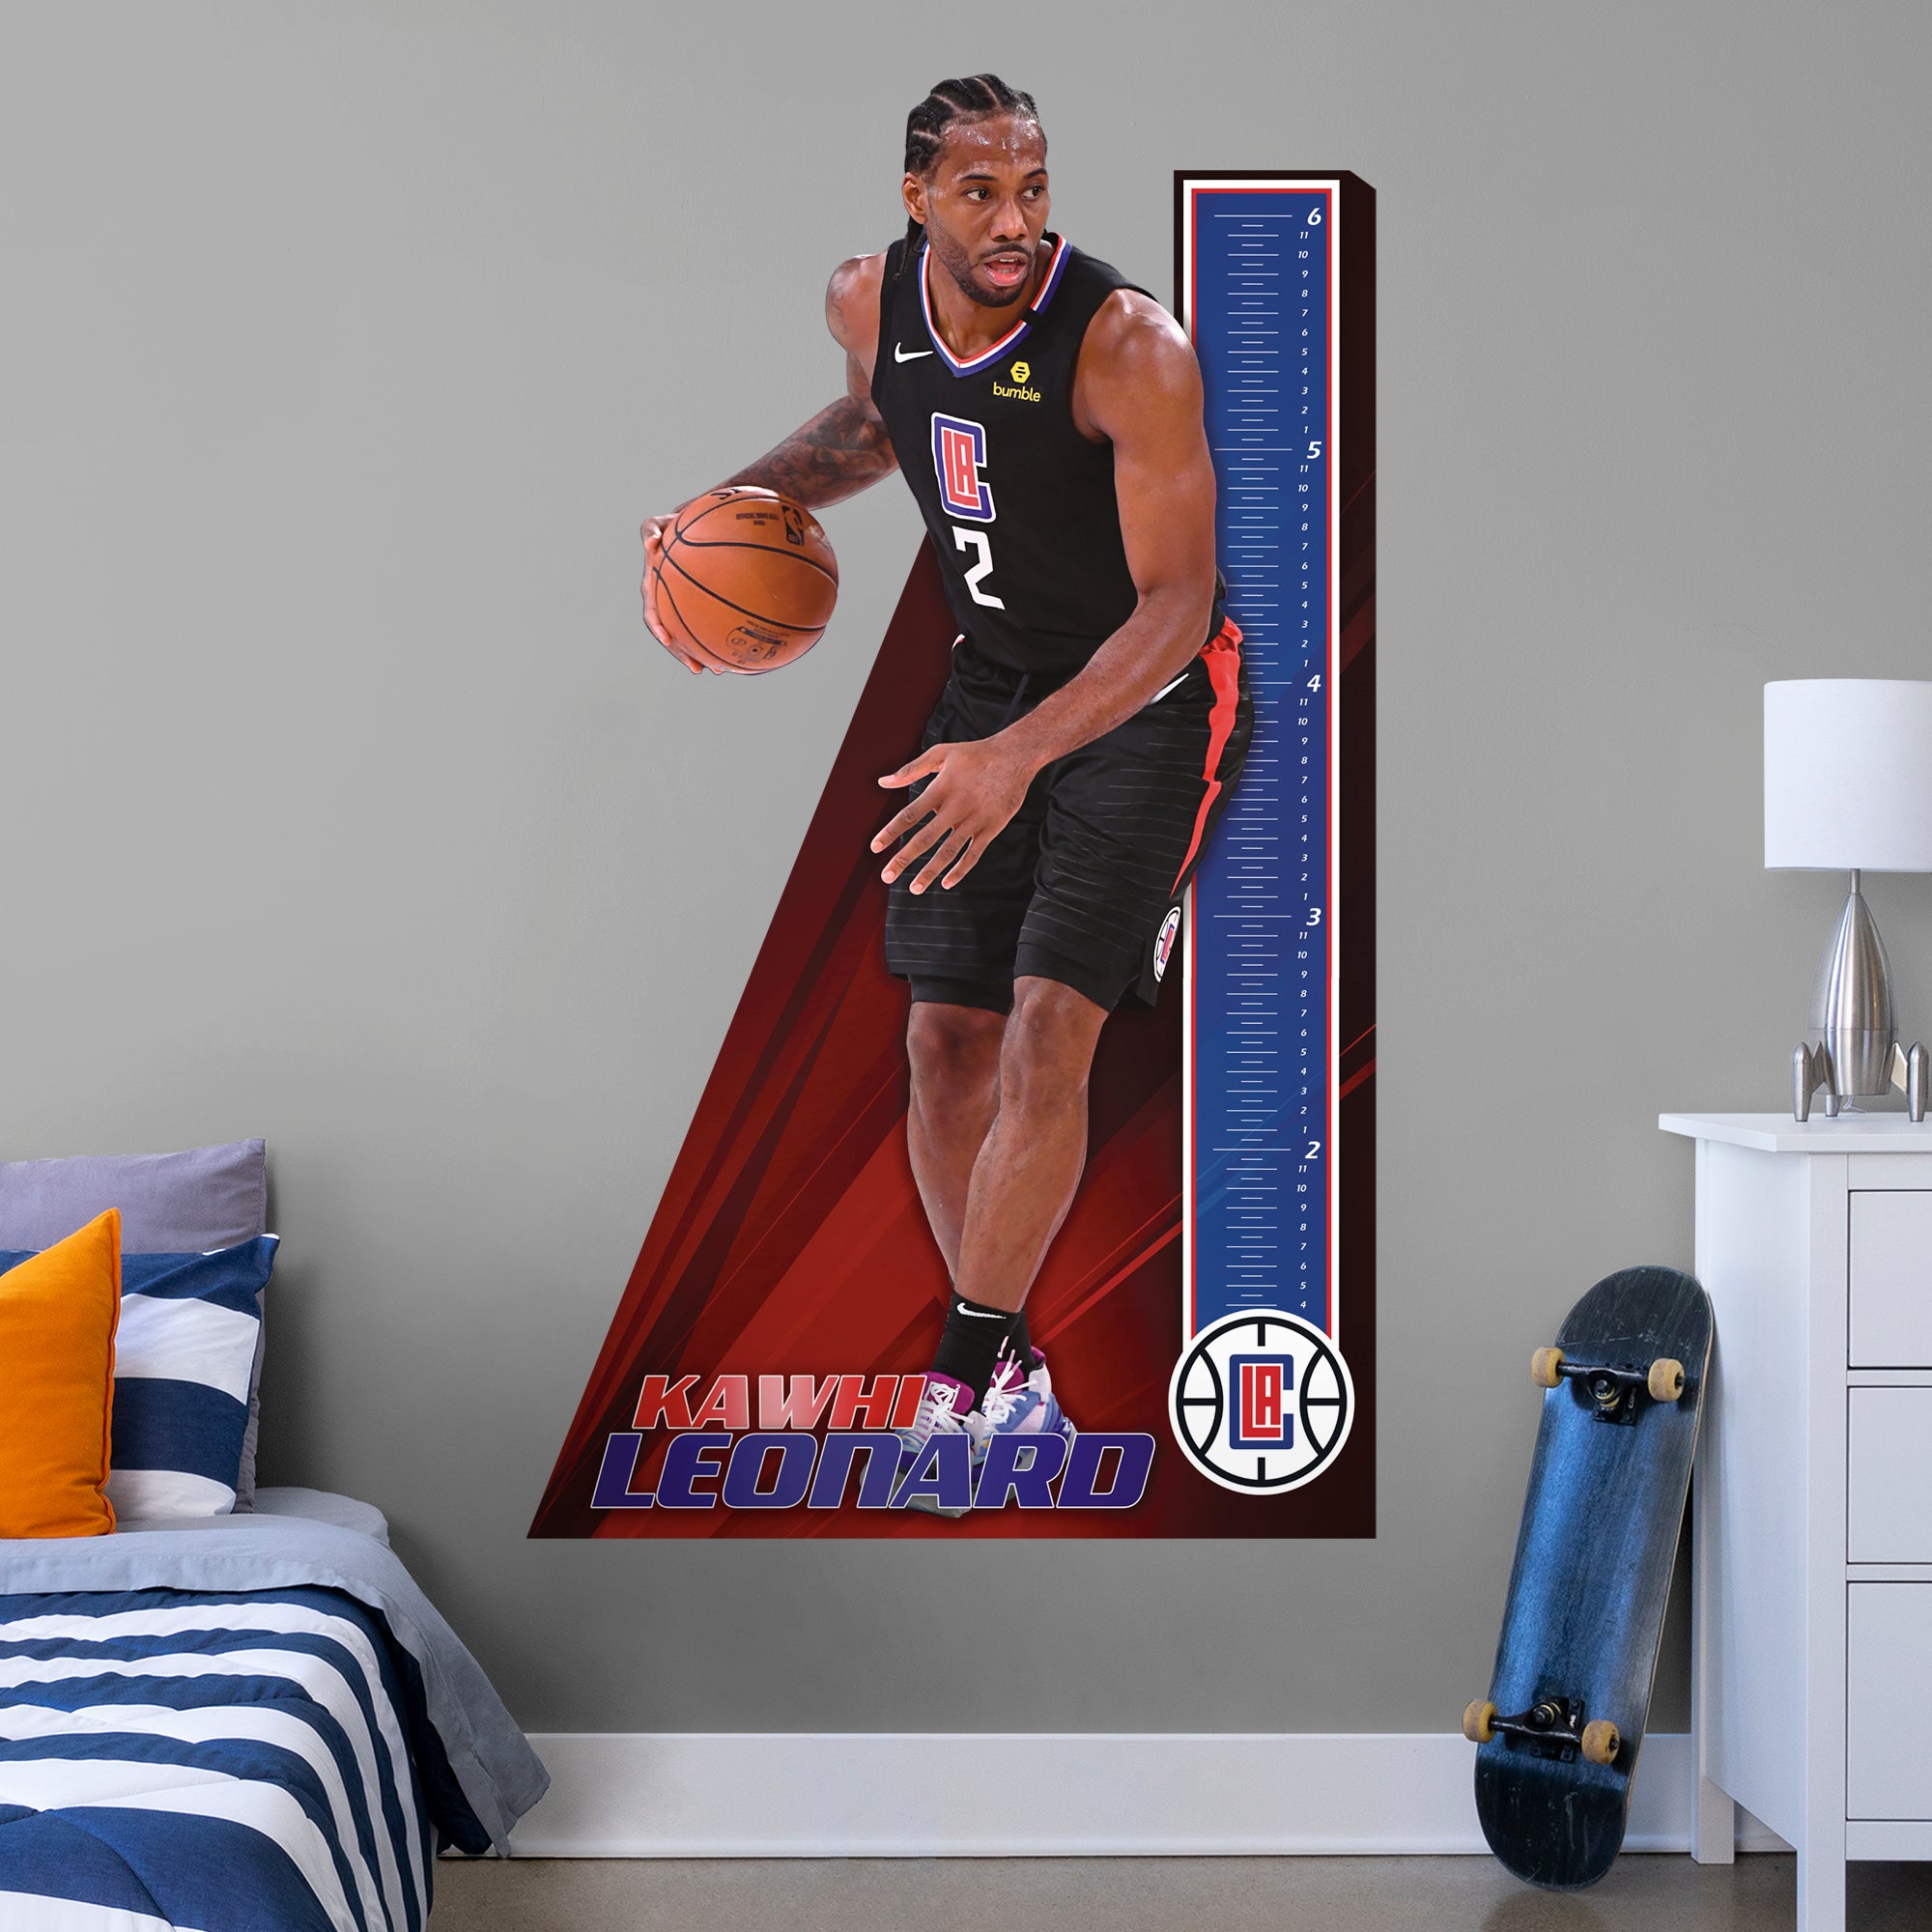 Kawhi Leonard 2020 Growth Chart - Officially Licensed NBA Removable Wall Decal Growth Chart (75"W x 43.5"H) by Fathead | Vinyl